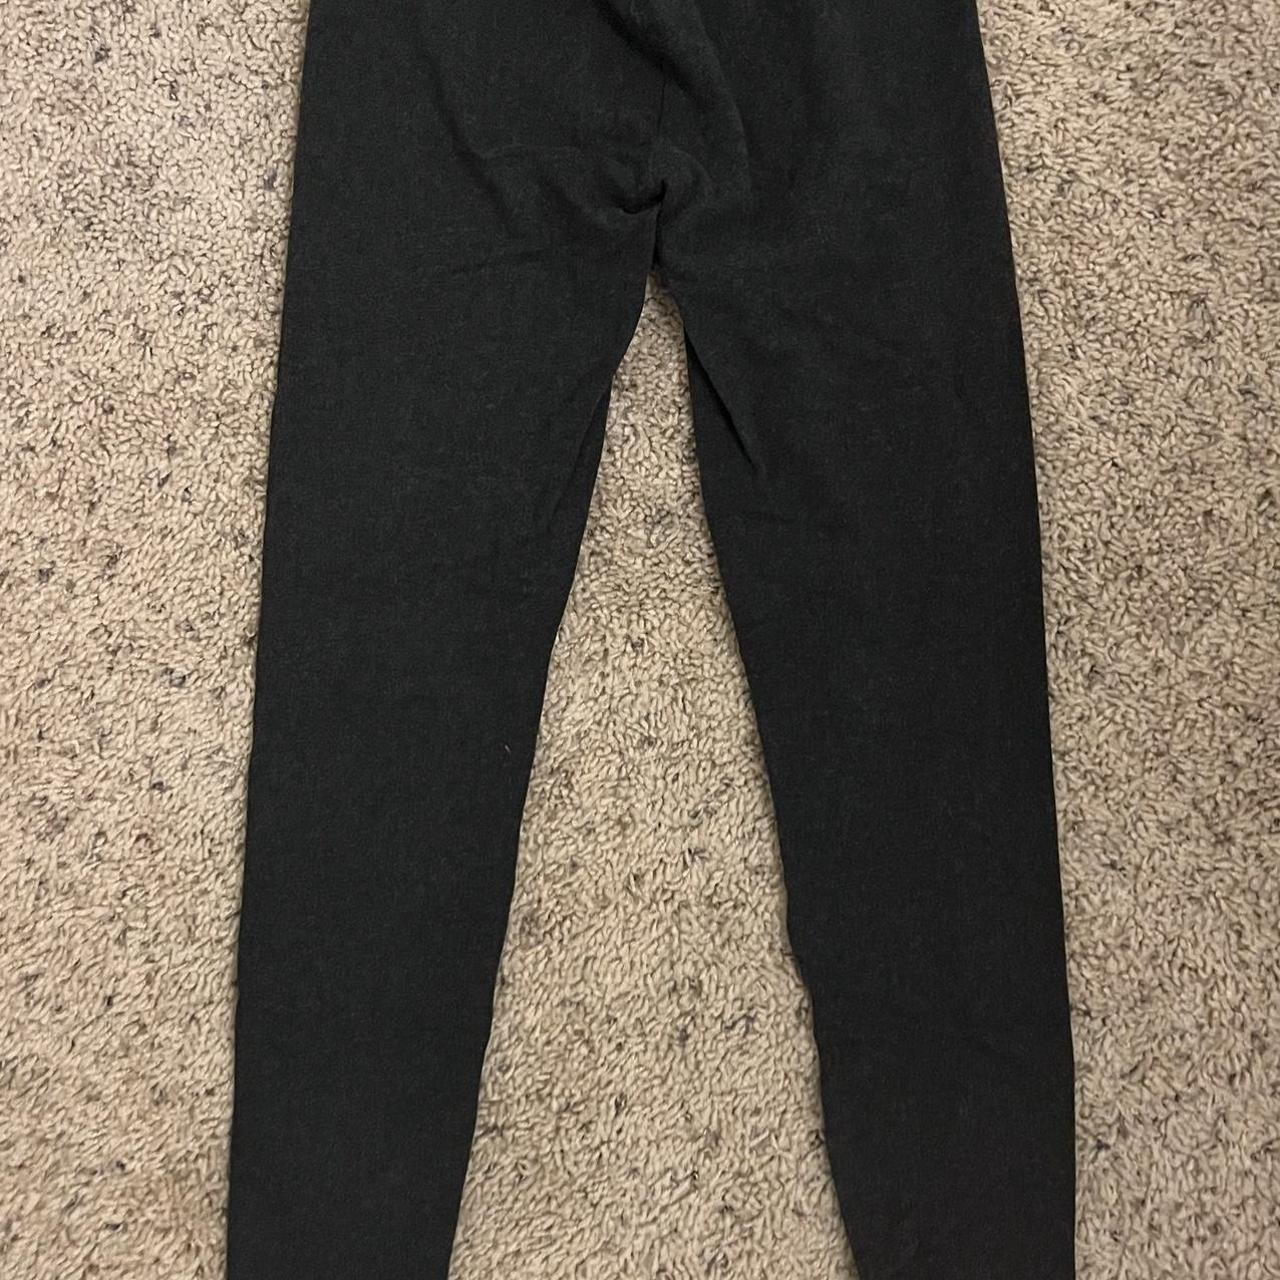 Leggings By Lou And Grey Size: S